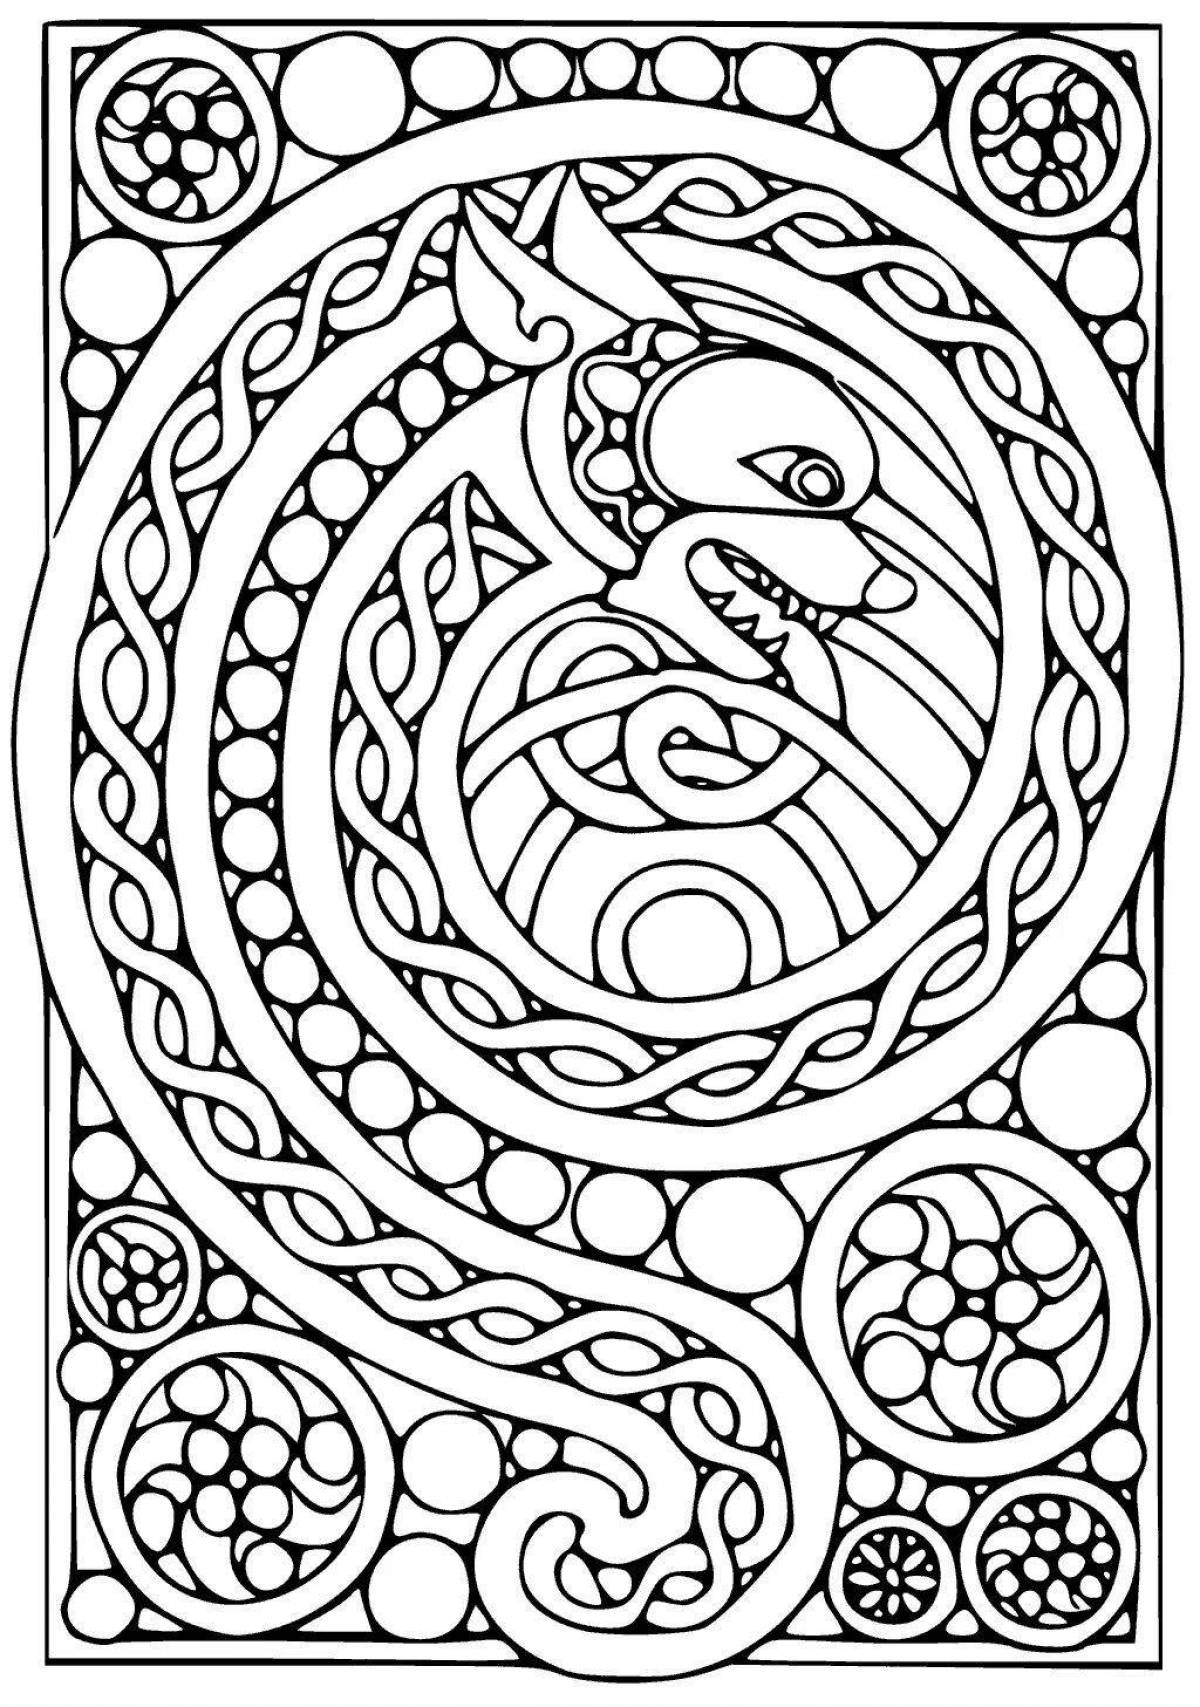 Fat tiles for coloring pages